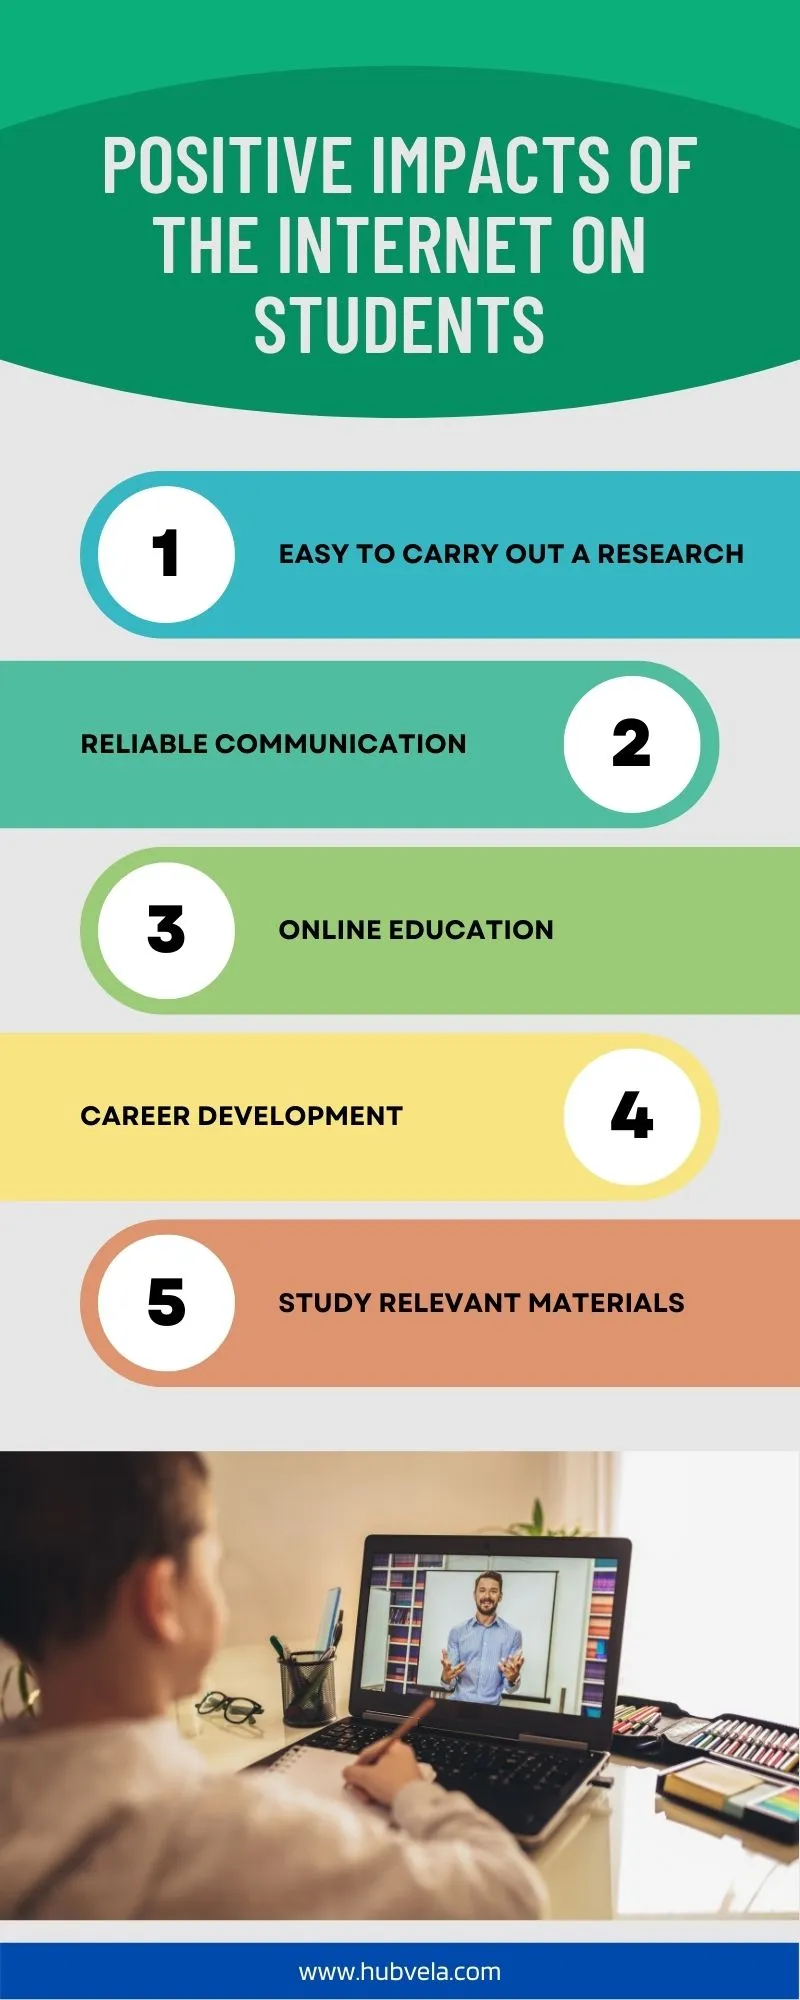 Positive Impacts of Internet on Students infographic